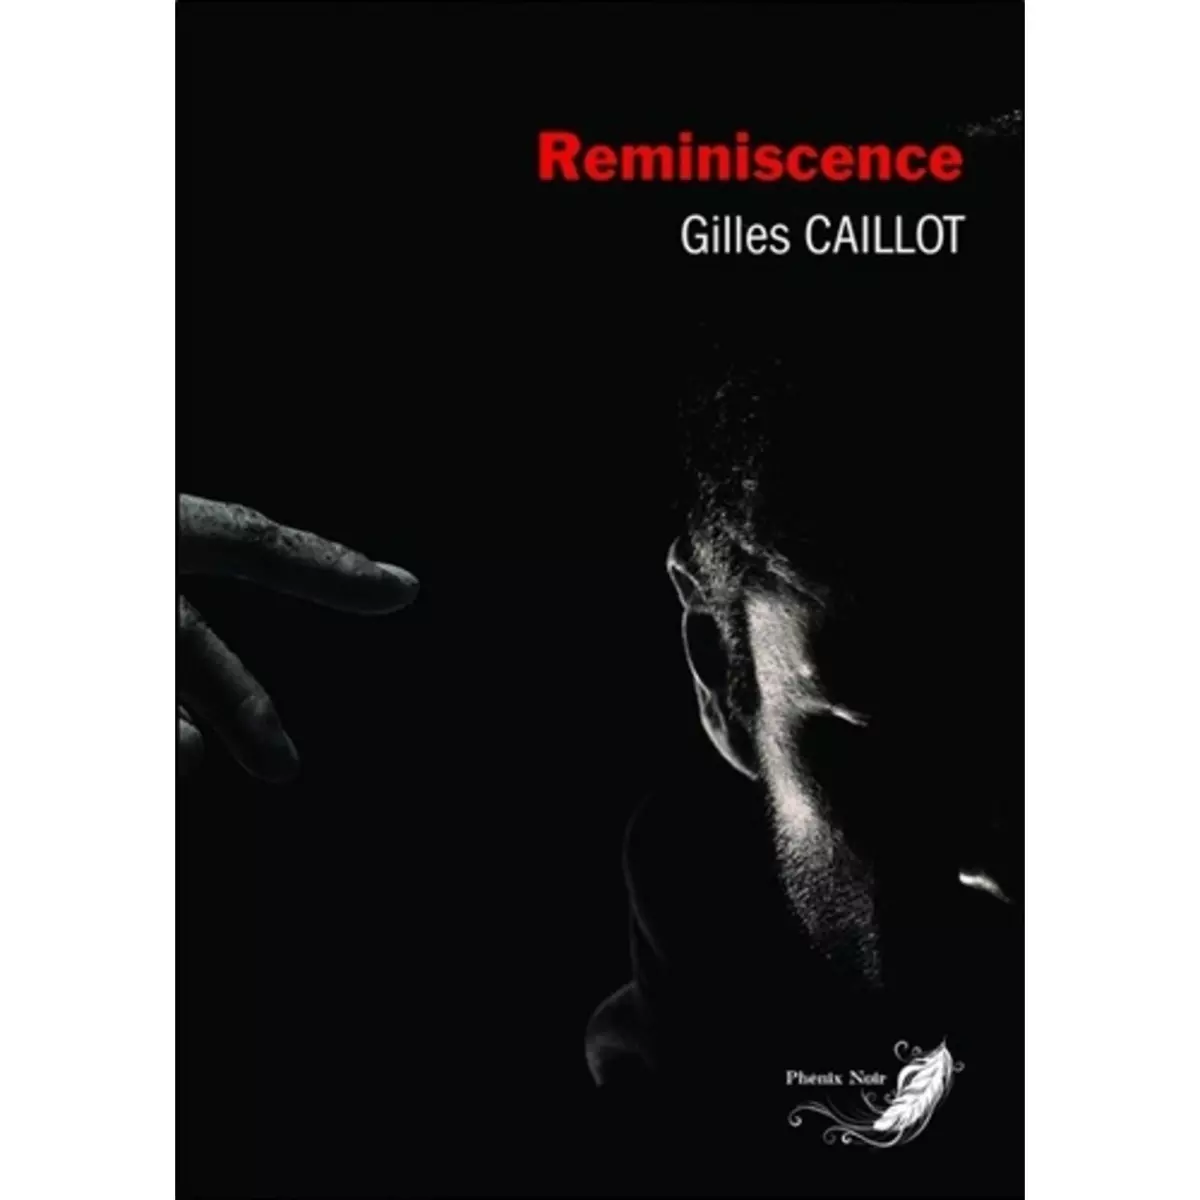  LE CYCLE DU MAL TOME 2 : REMINISCENCE, Caillot Gilles